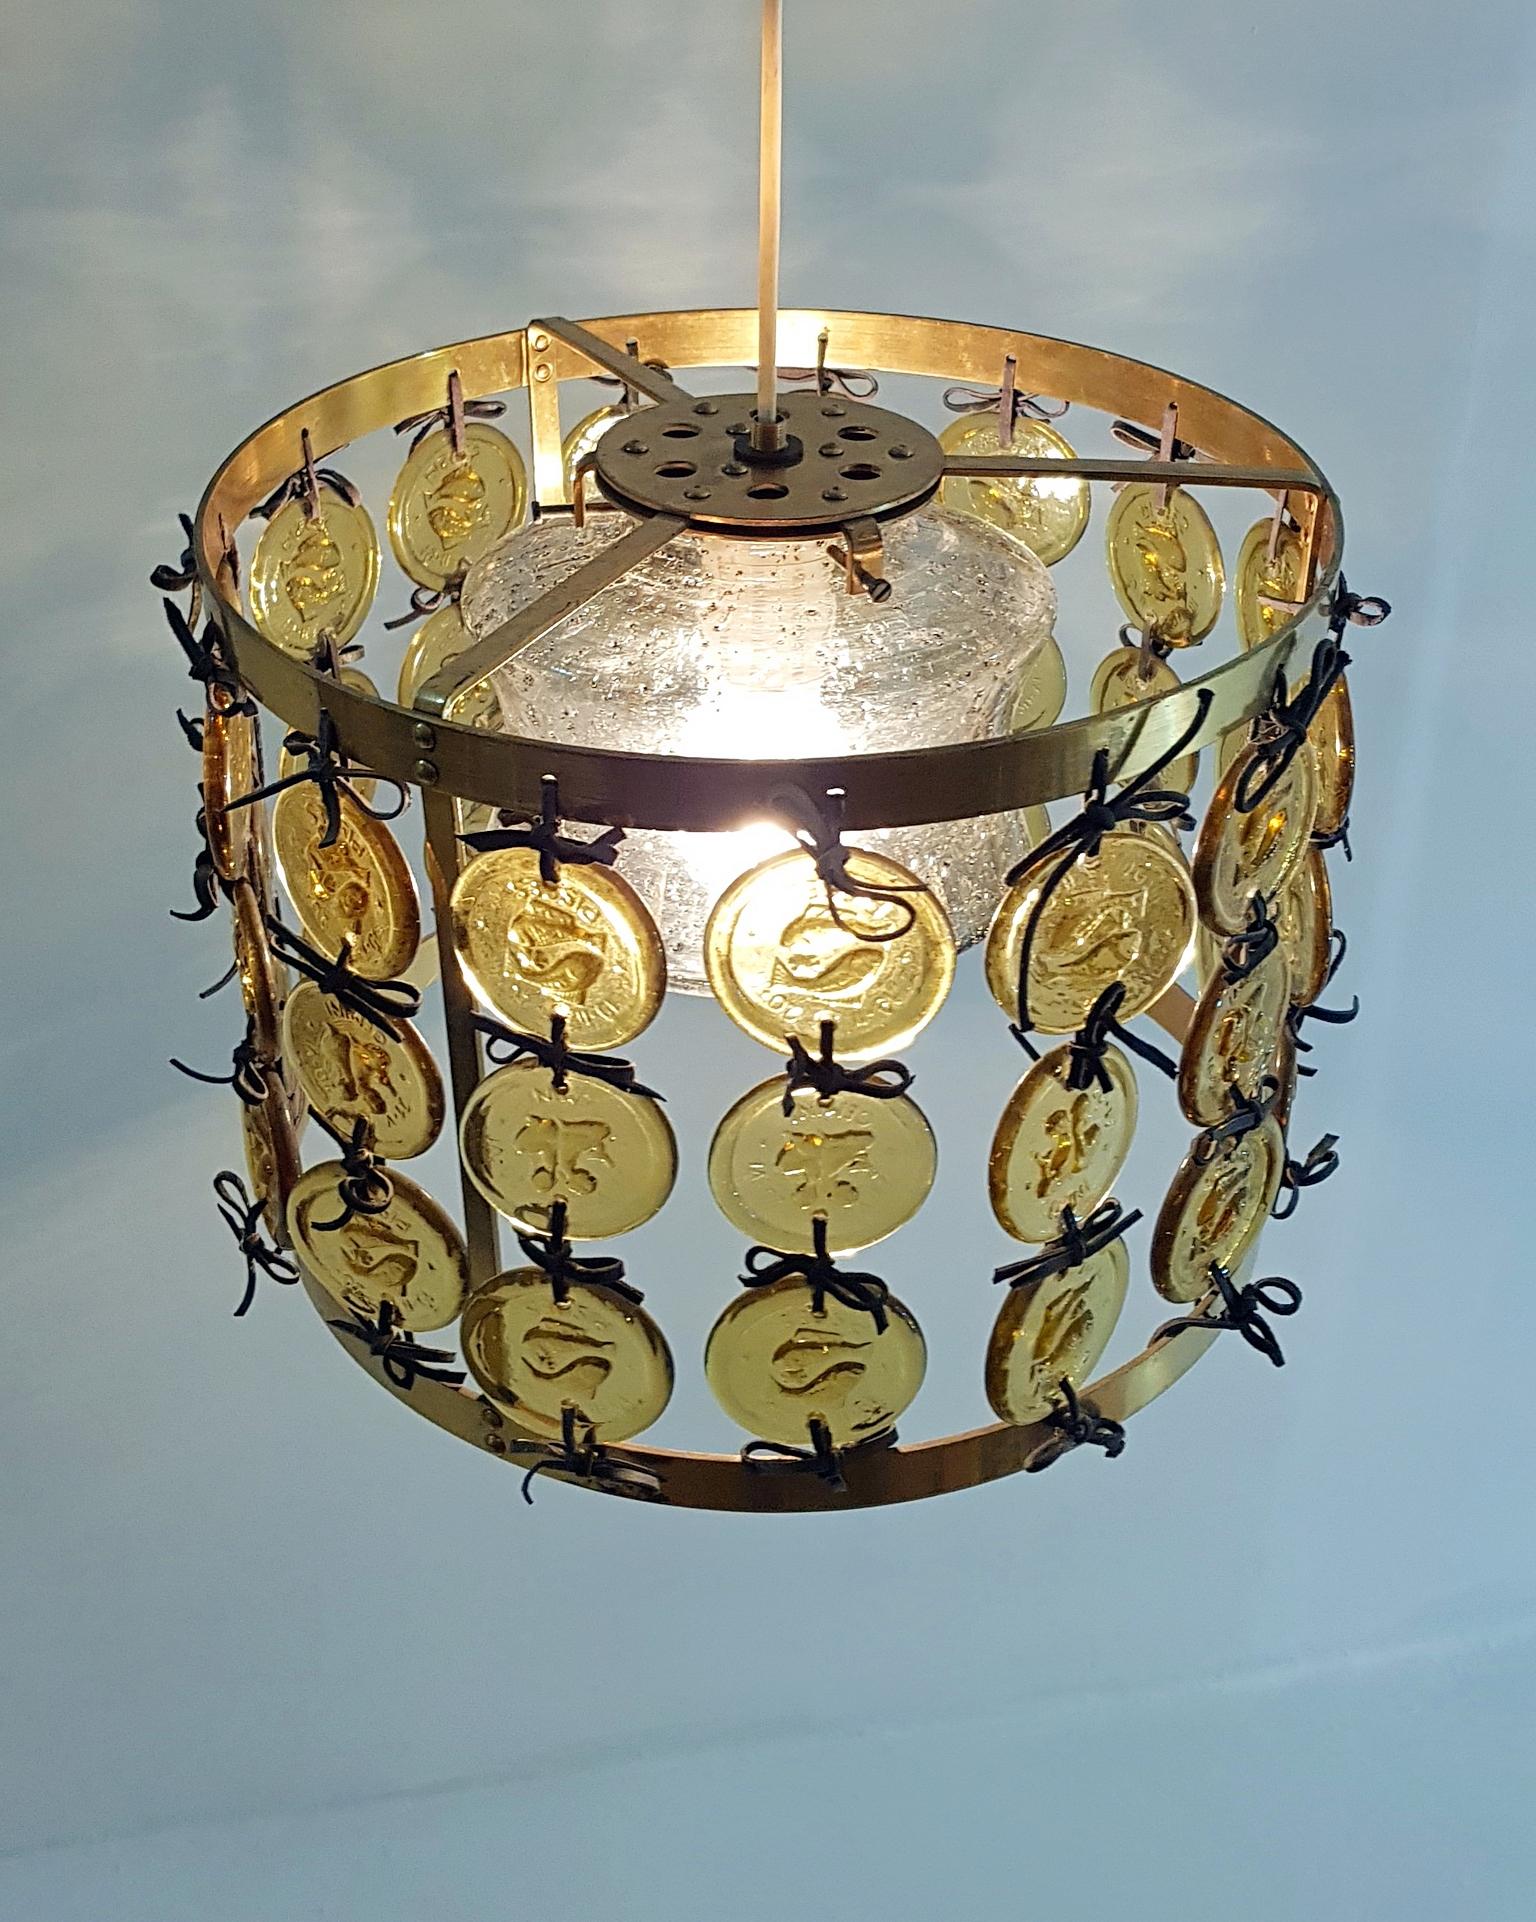 Rare celling lamp by Swedish designer Erik Höglund for glass maker Kosta Boda Glass manufacturers. The frame is made in brass with attached round pieces of glass depicting the star signs Pisces and Gemini bound together in black leather strings. In